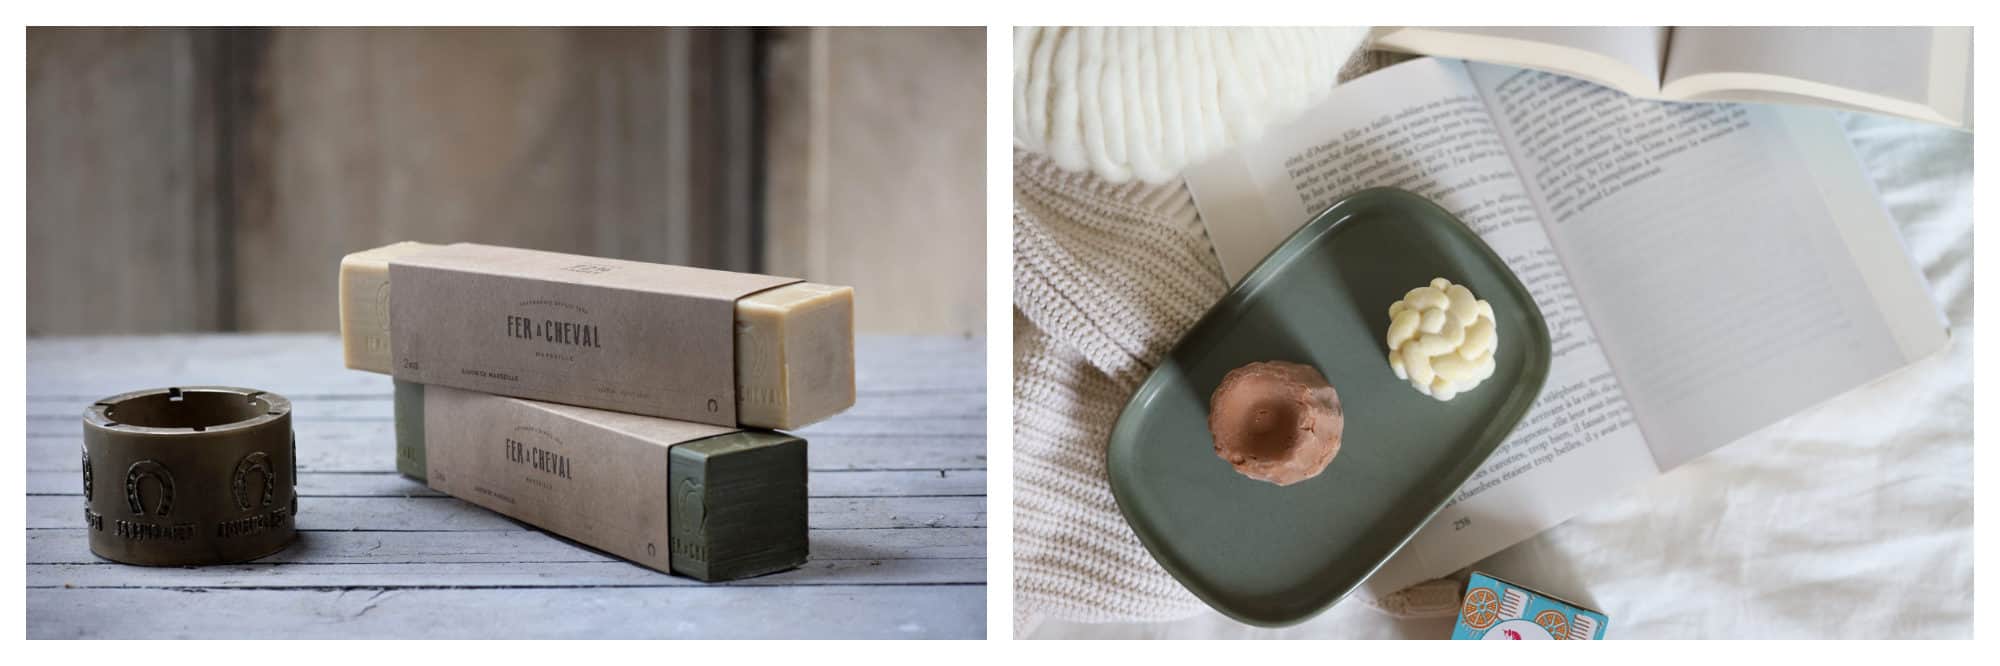 Luxury bars of soap from French brand Fer à Cheval (left) and solid shampoo and body cream by Lamazuna in Paris 'right).